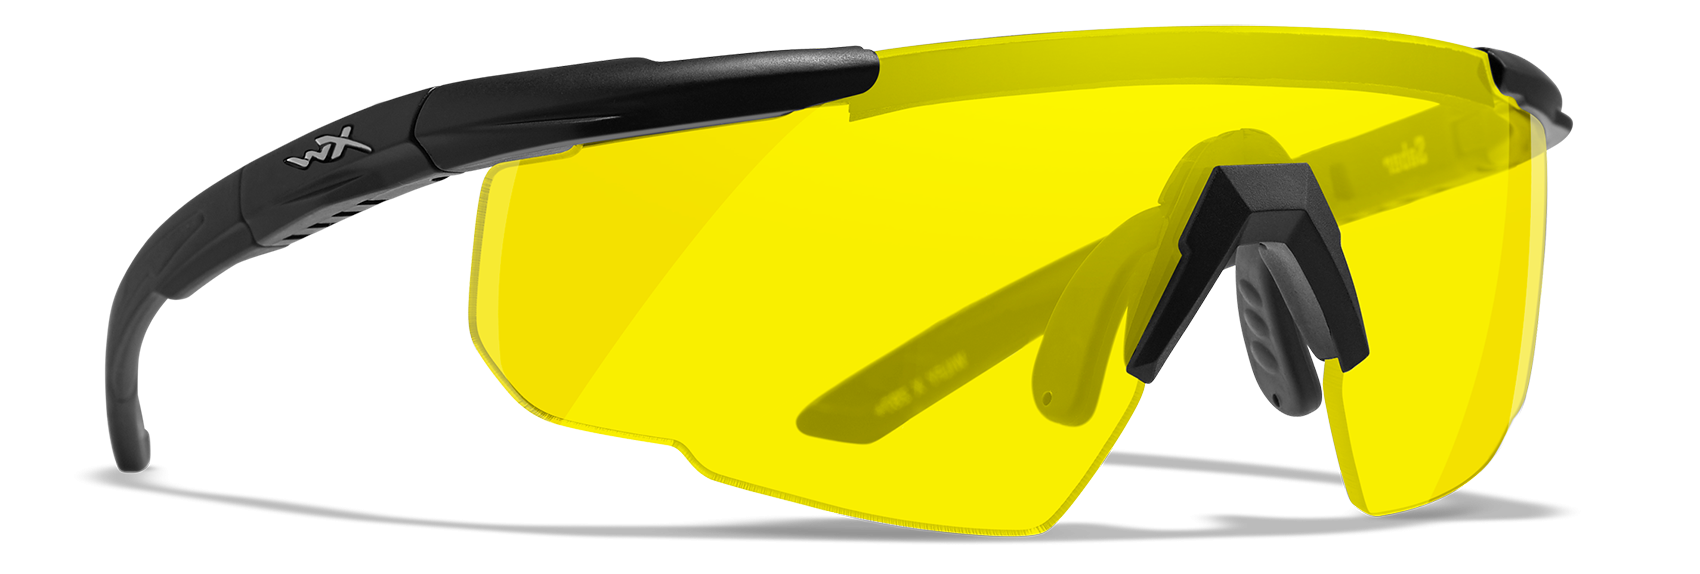 Wiley X Saber Advanced Pale Yellow Polycarbonate Sunglasses